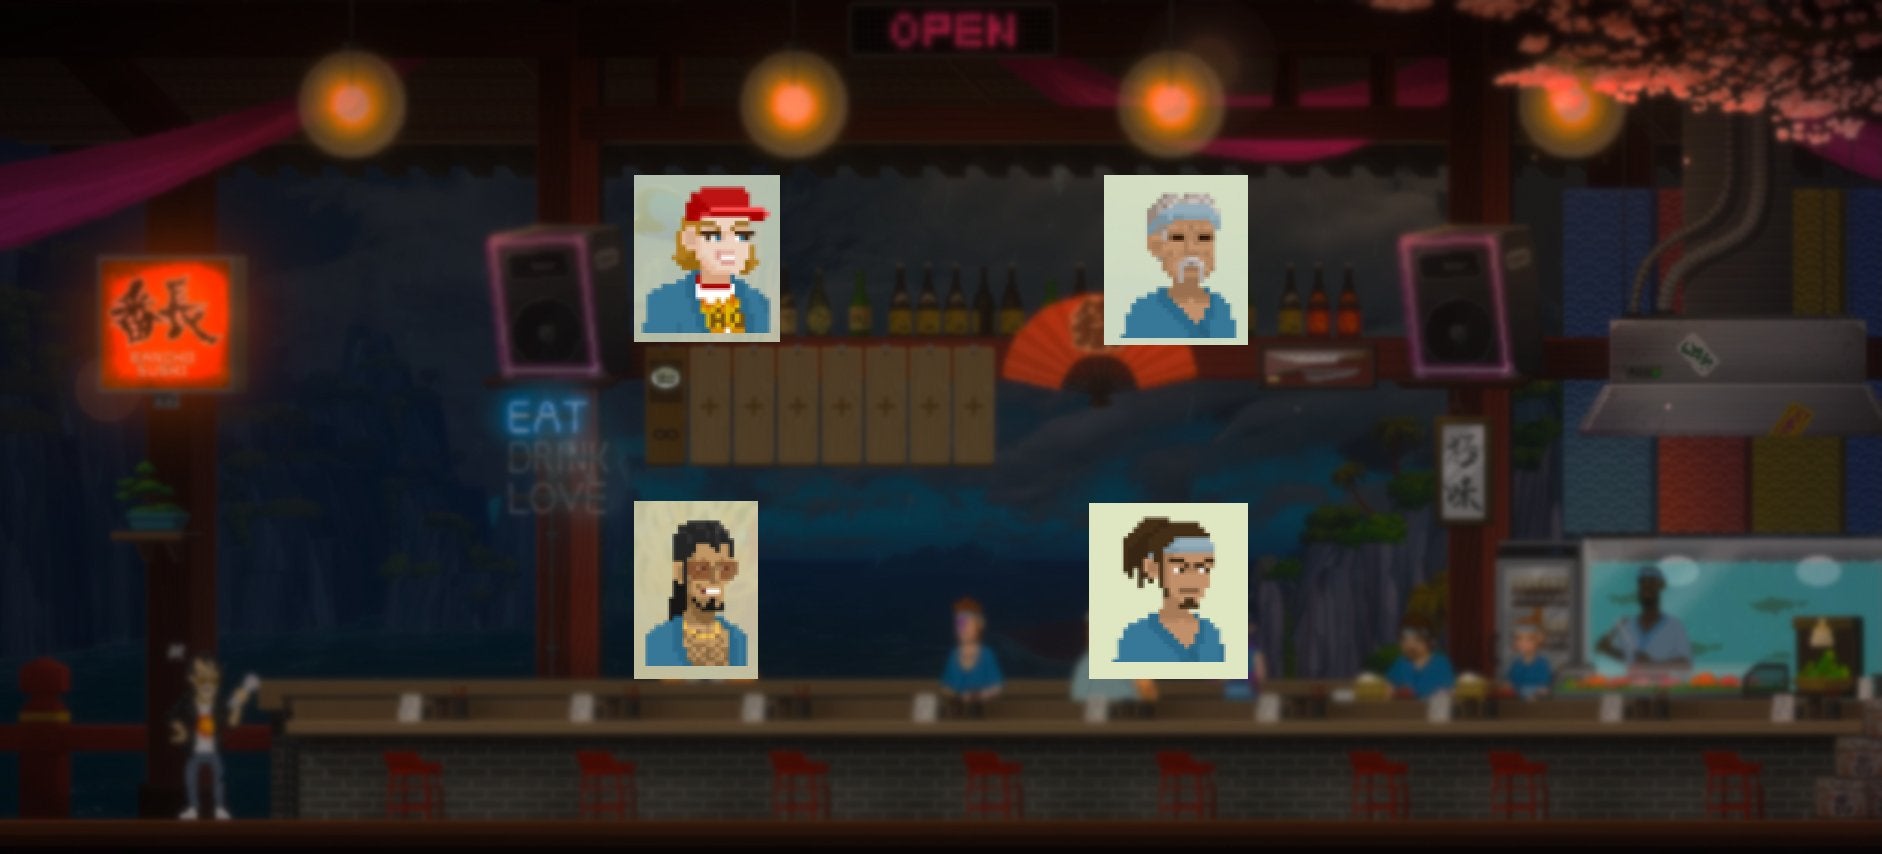 The portraits of four staff members in clockwise order: Pai, Yusuke, Masayoshi, and Davina. These staff members are in front of Bancho Sushi Bar in Dave the Diver.